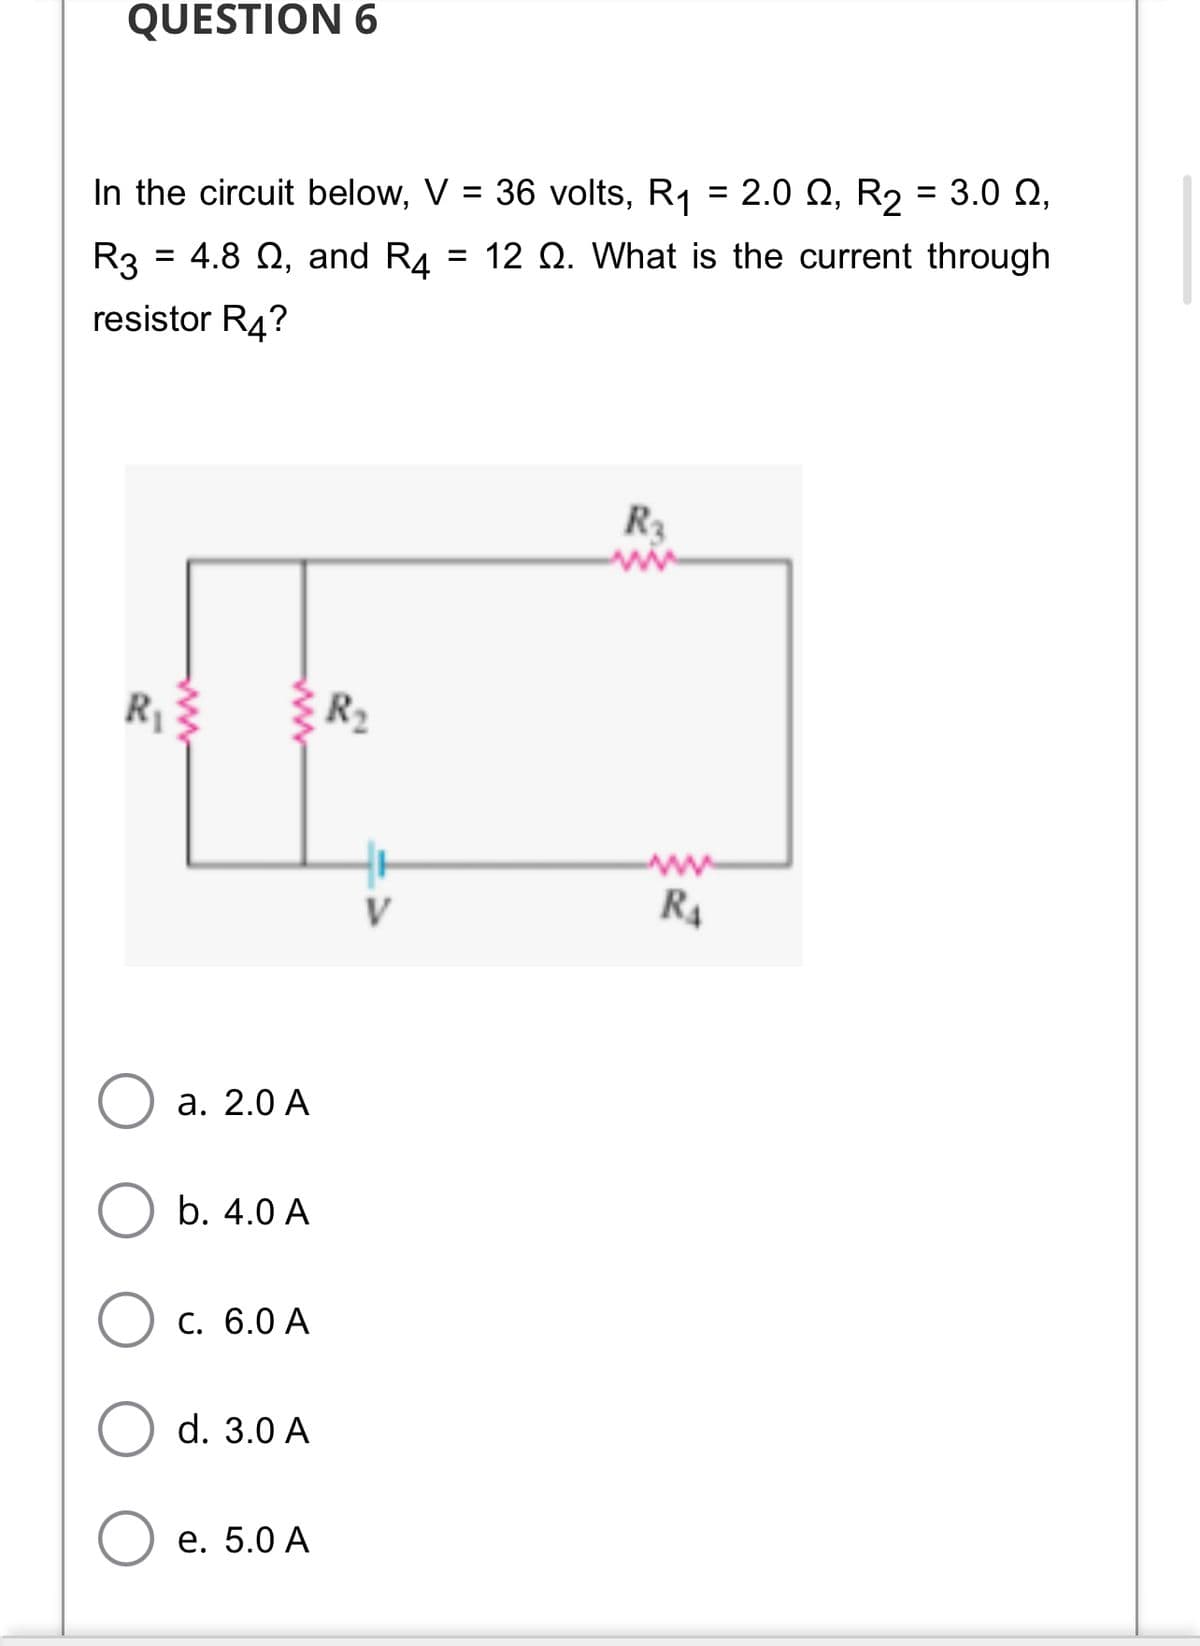 QUESTION 6
In the circuit below, V = 36 volts, R1 = 2.0 Q, R2 = 3.0 Q,
R3 = 4.8 Q, and R4 = 12 Q. What is the current through
%3D
resistor R4?
R3
R
V
R4
а. 2.0 А
b. 4.0 A
C. 6.0 A
d. 3.0 A
е. 5.0 А
ww
ww
